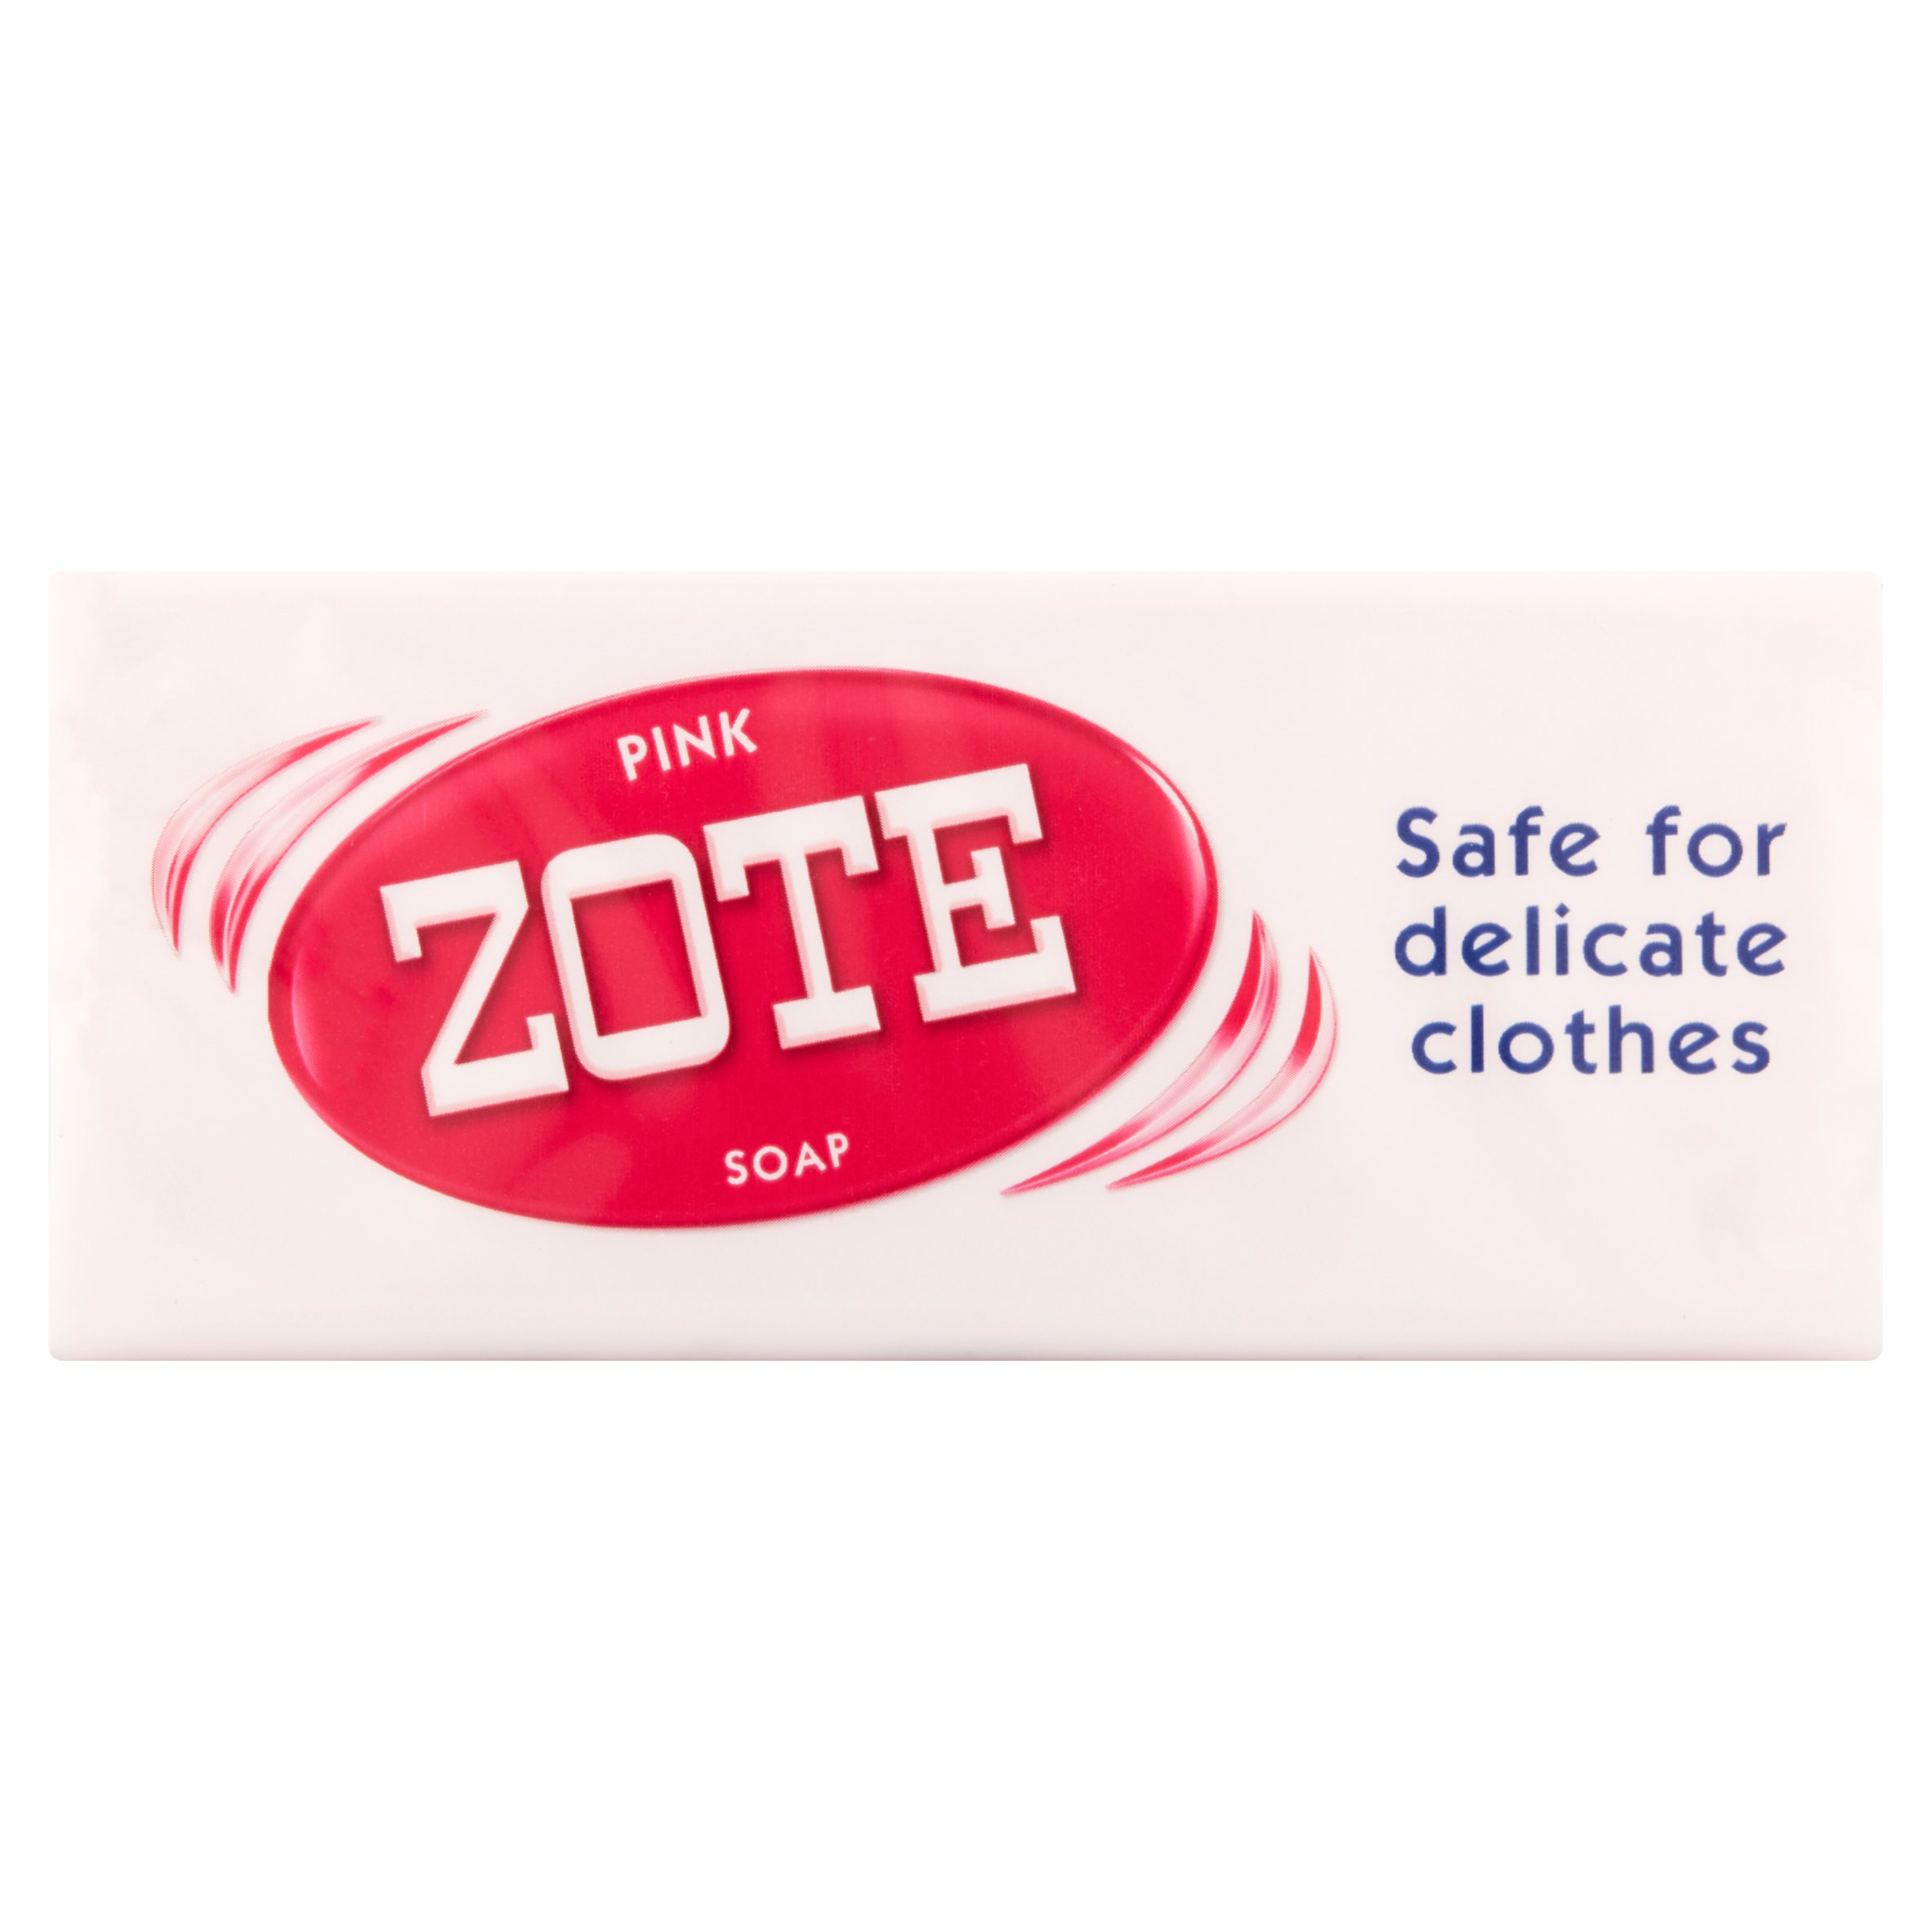 ZOTE Laundry Bar Soap Pink, 14.1 Ounce - image 3 of 9